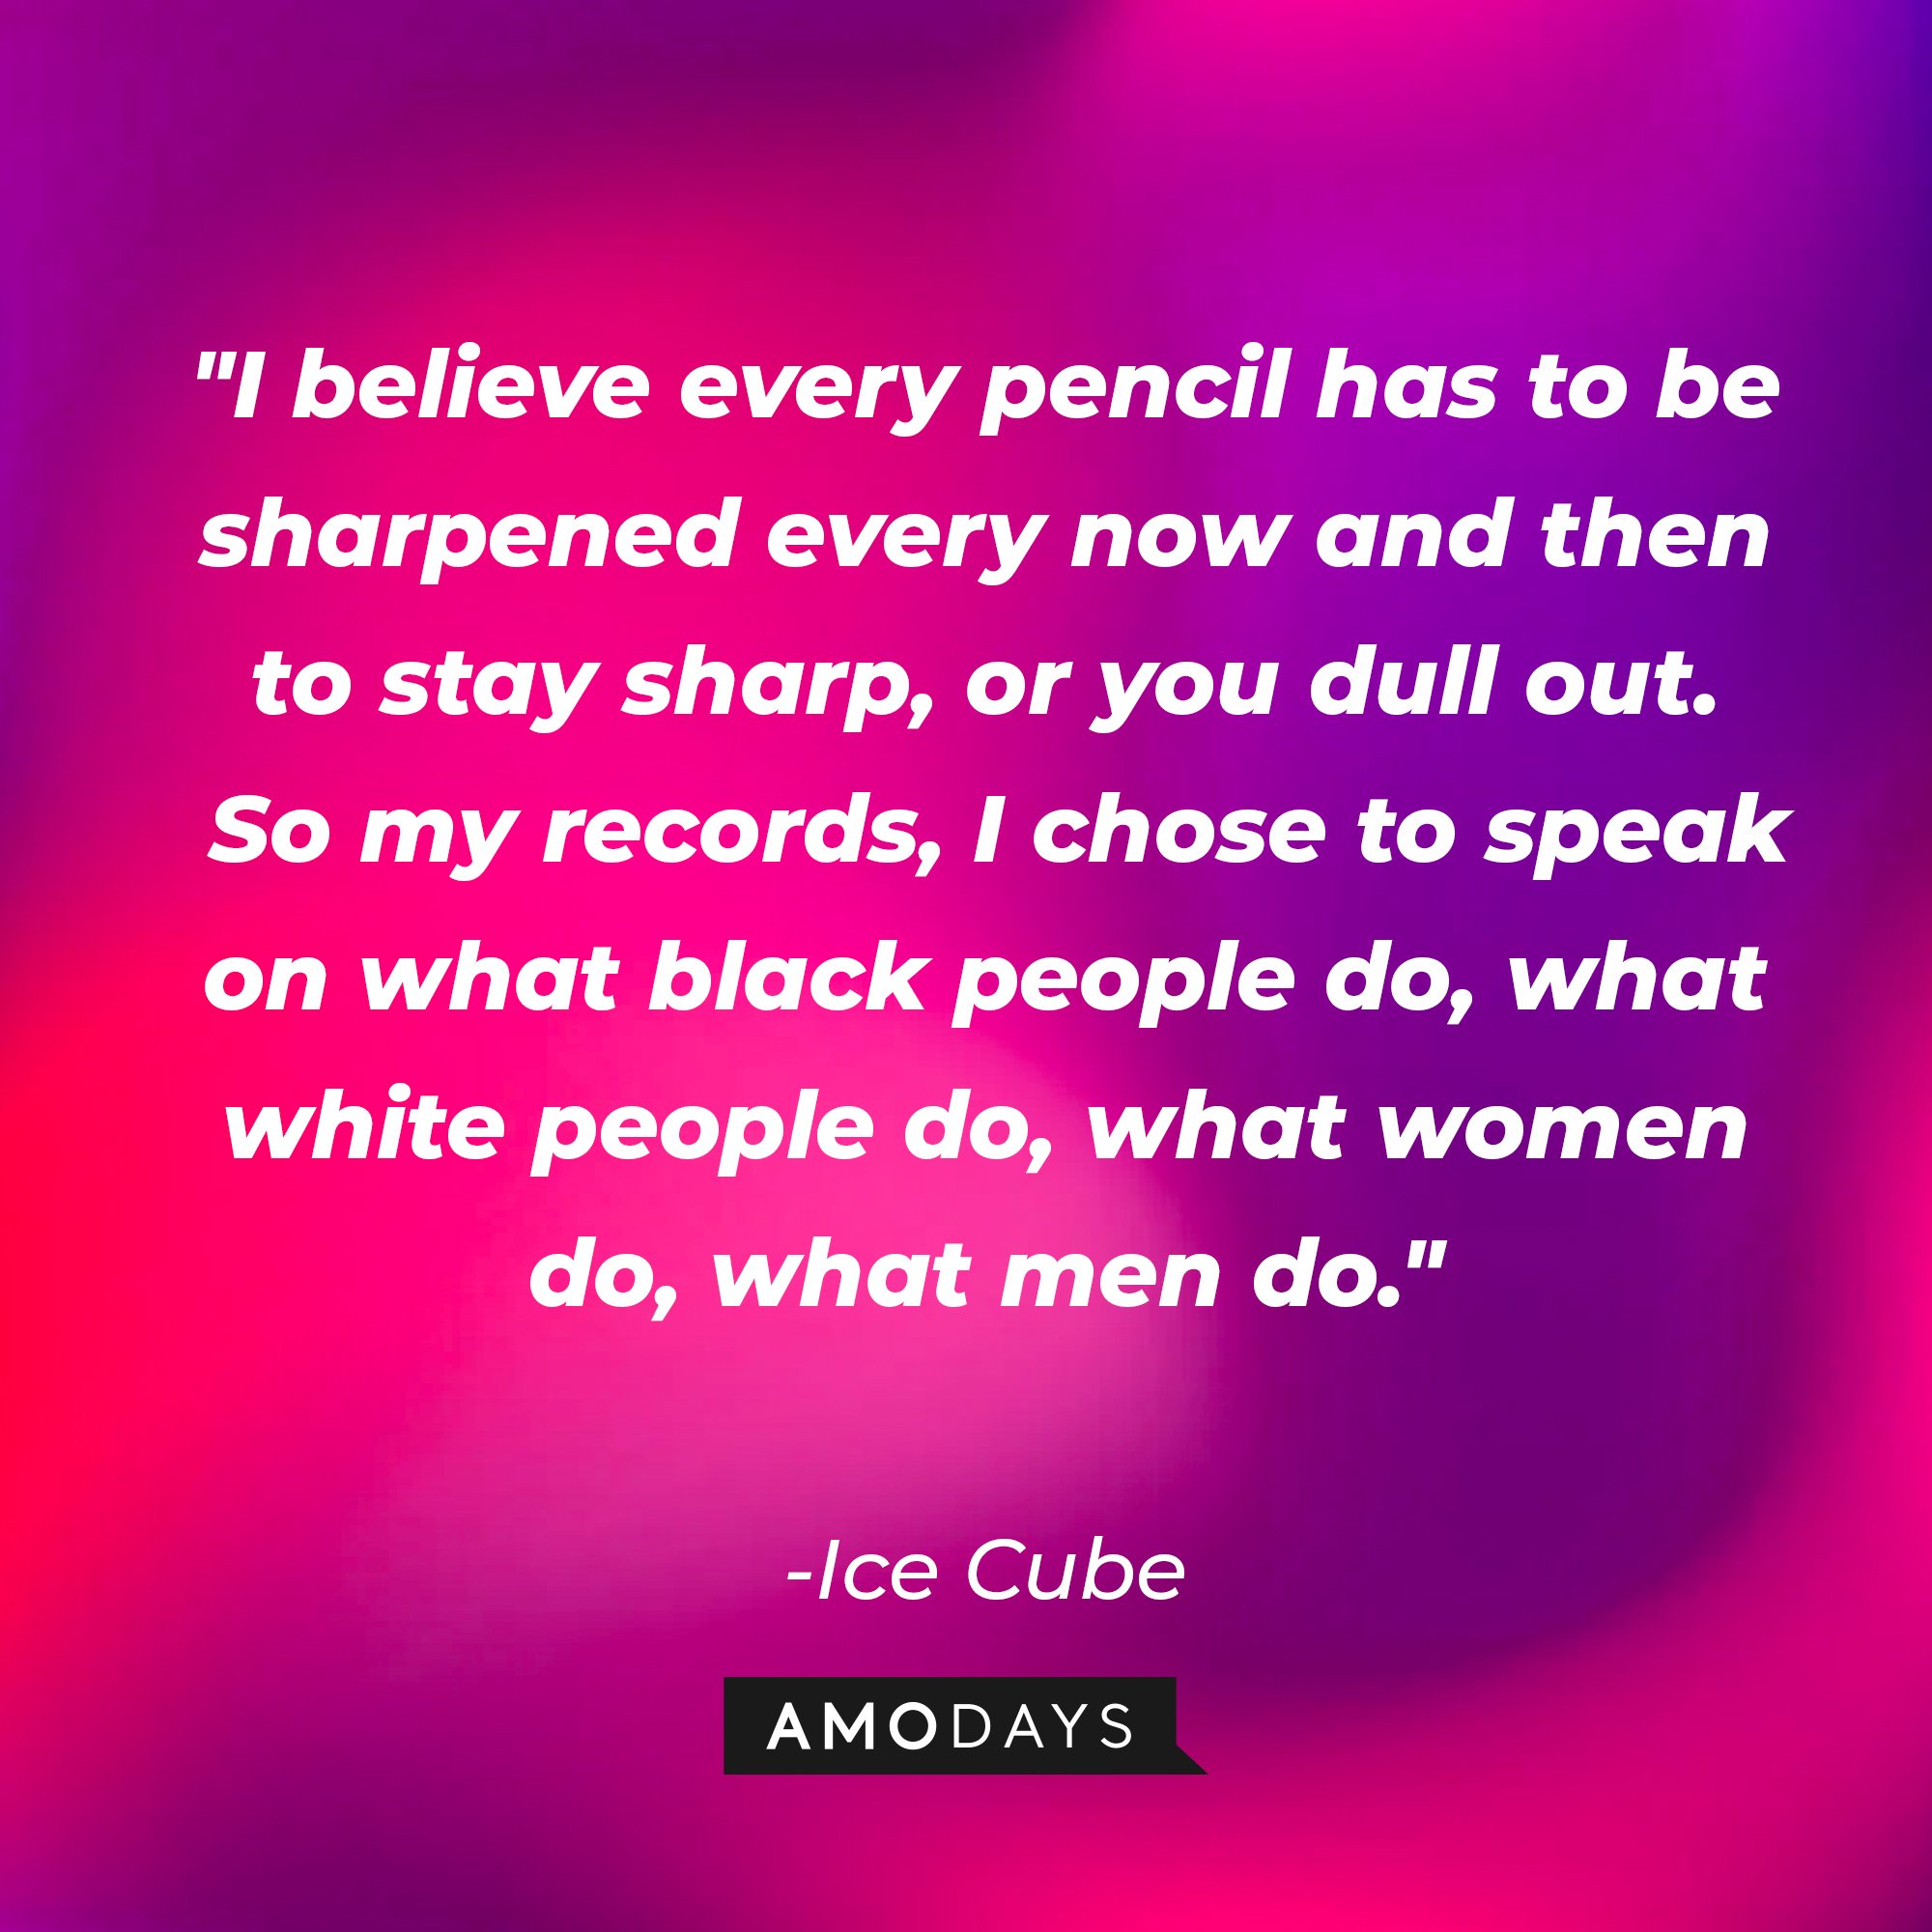 Ice Cube's quote: "I believe every pencil has to be sharpened every now and then to stay sharp, or you dull out. So my records, I chose to speak on what black people do, what white people do, what women do, what men do." — Ice Cube | Image: AmoDays